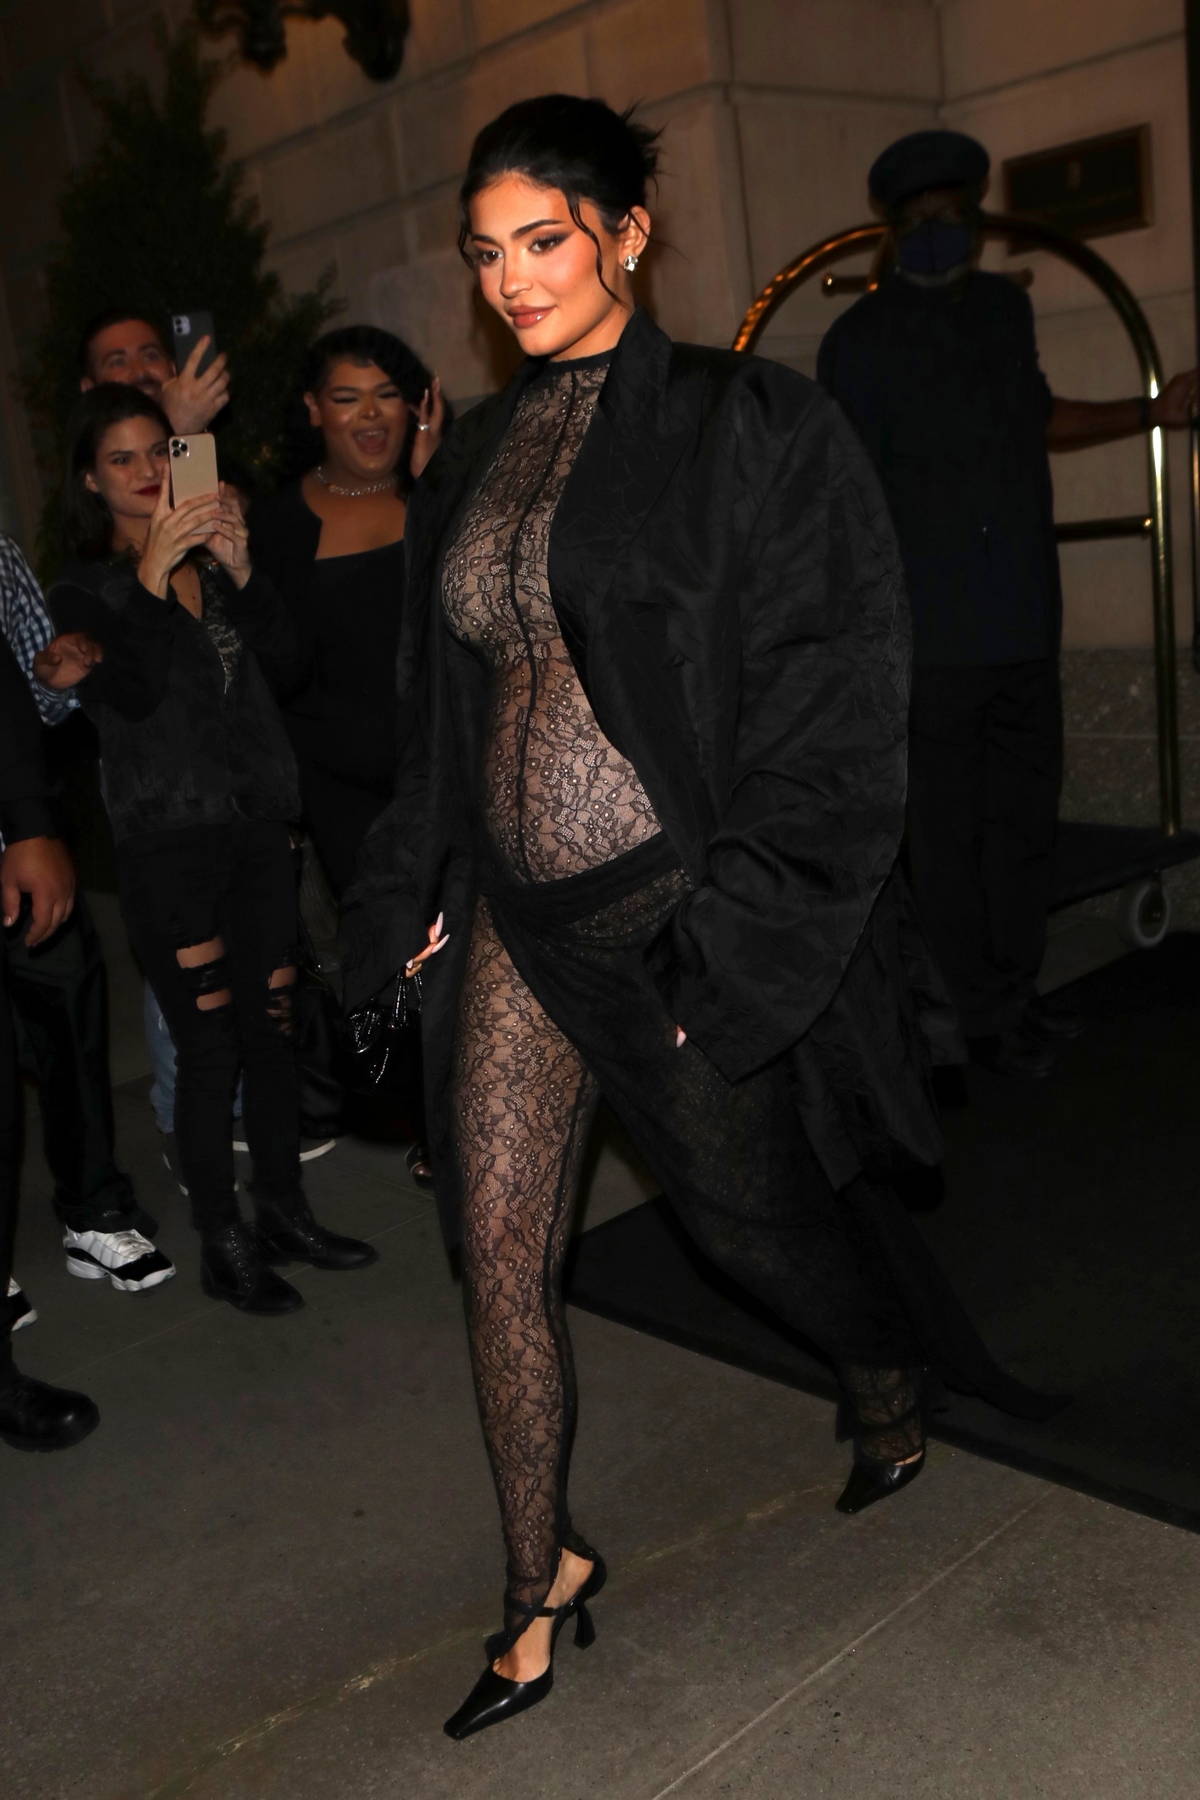 https://www.celebsfirst.com/wp-content/uploads/2021/09/kylie-jenner-stuns-in-a-sheer-lace-jumpsuit-with-a-black-duster-while-attending-a-birthday-party-at-lucali-in-new-york-city-090921_7.jpg